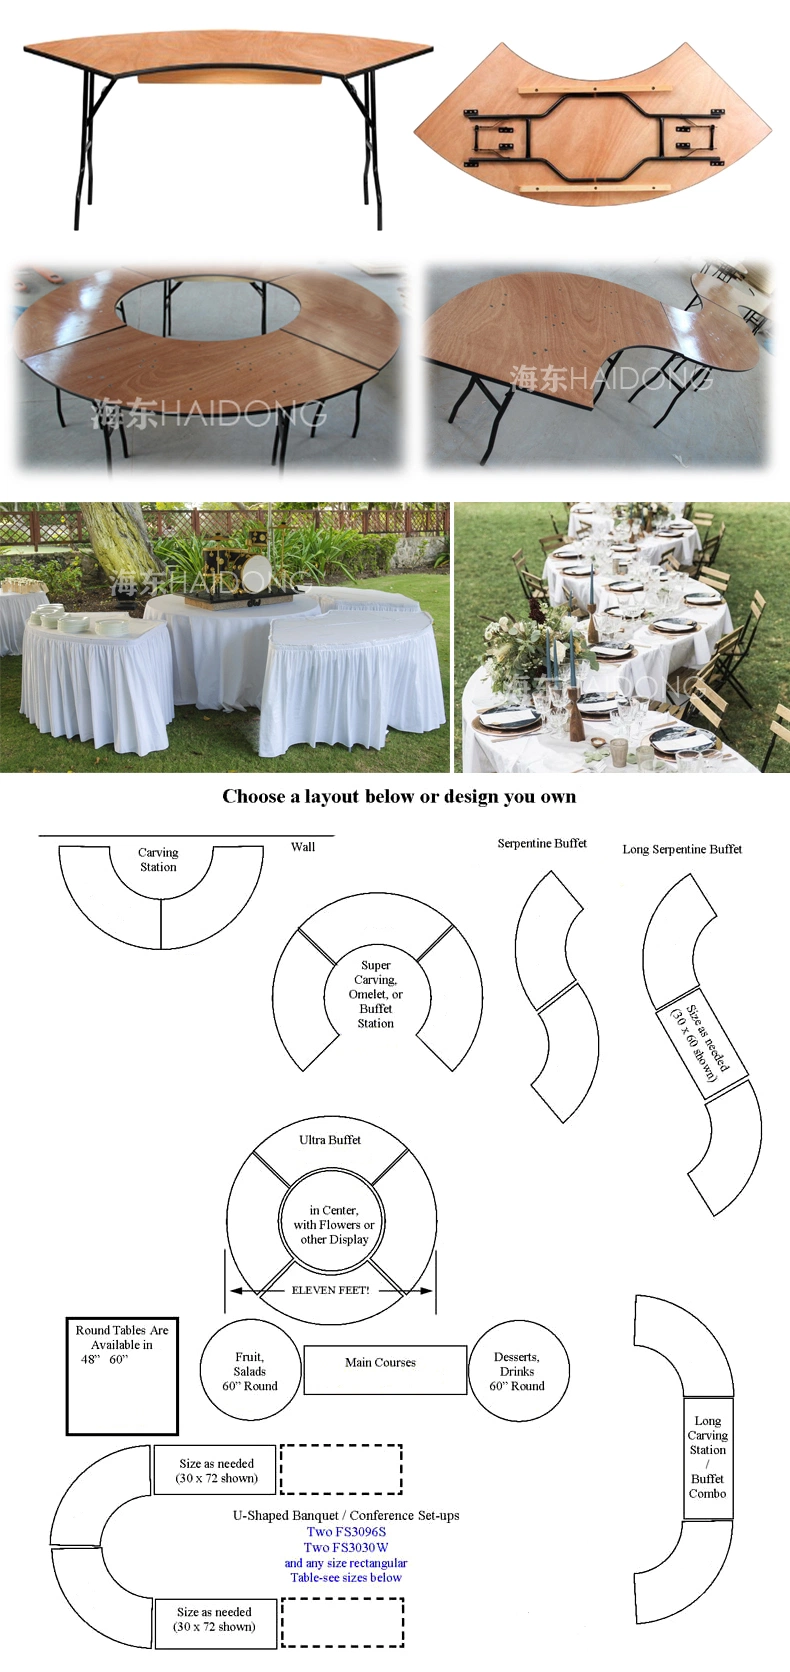 Outdoor 6FT Rectangular Plywood Folding Banquet Wedding Dining Tables